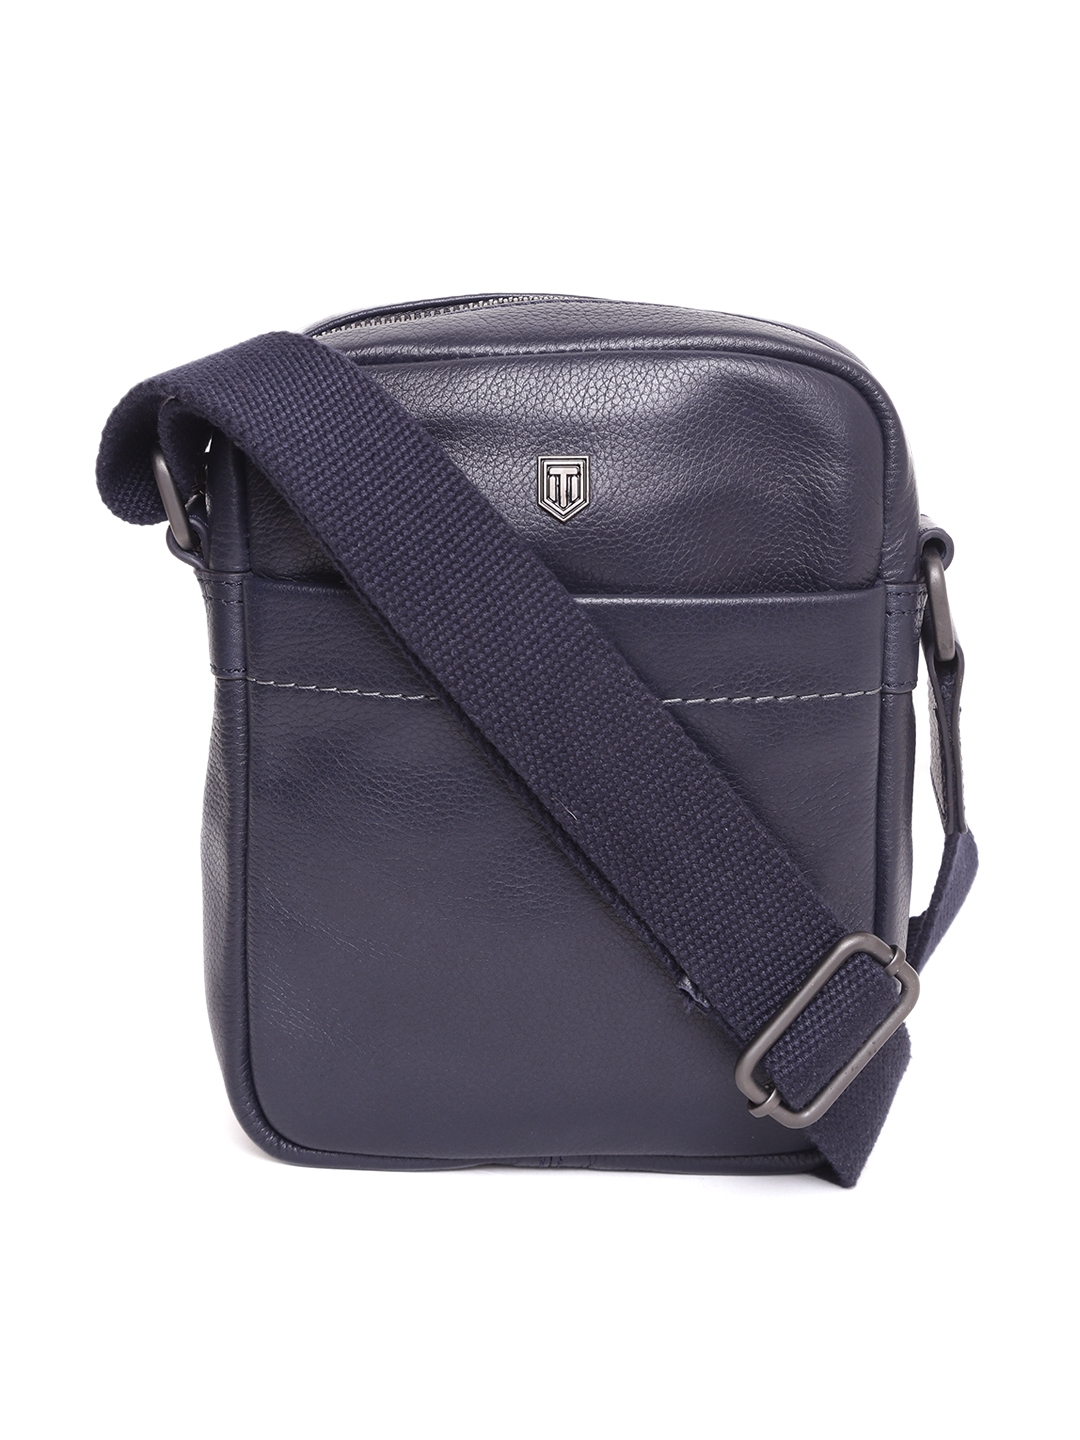 TOM LANG LONDON | Tom Lang London Signature Crossbody Leather Bag (Navy) For Men and Woman